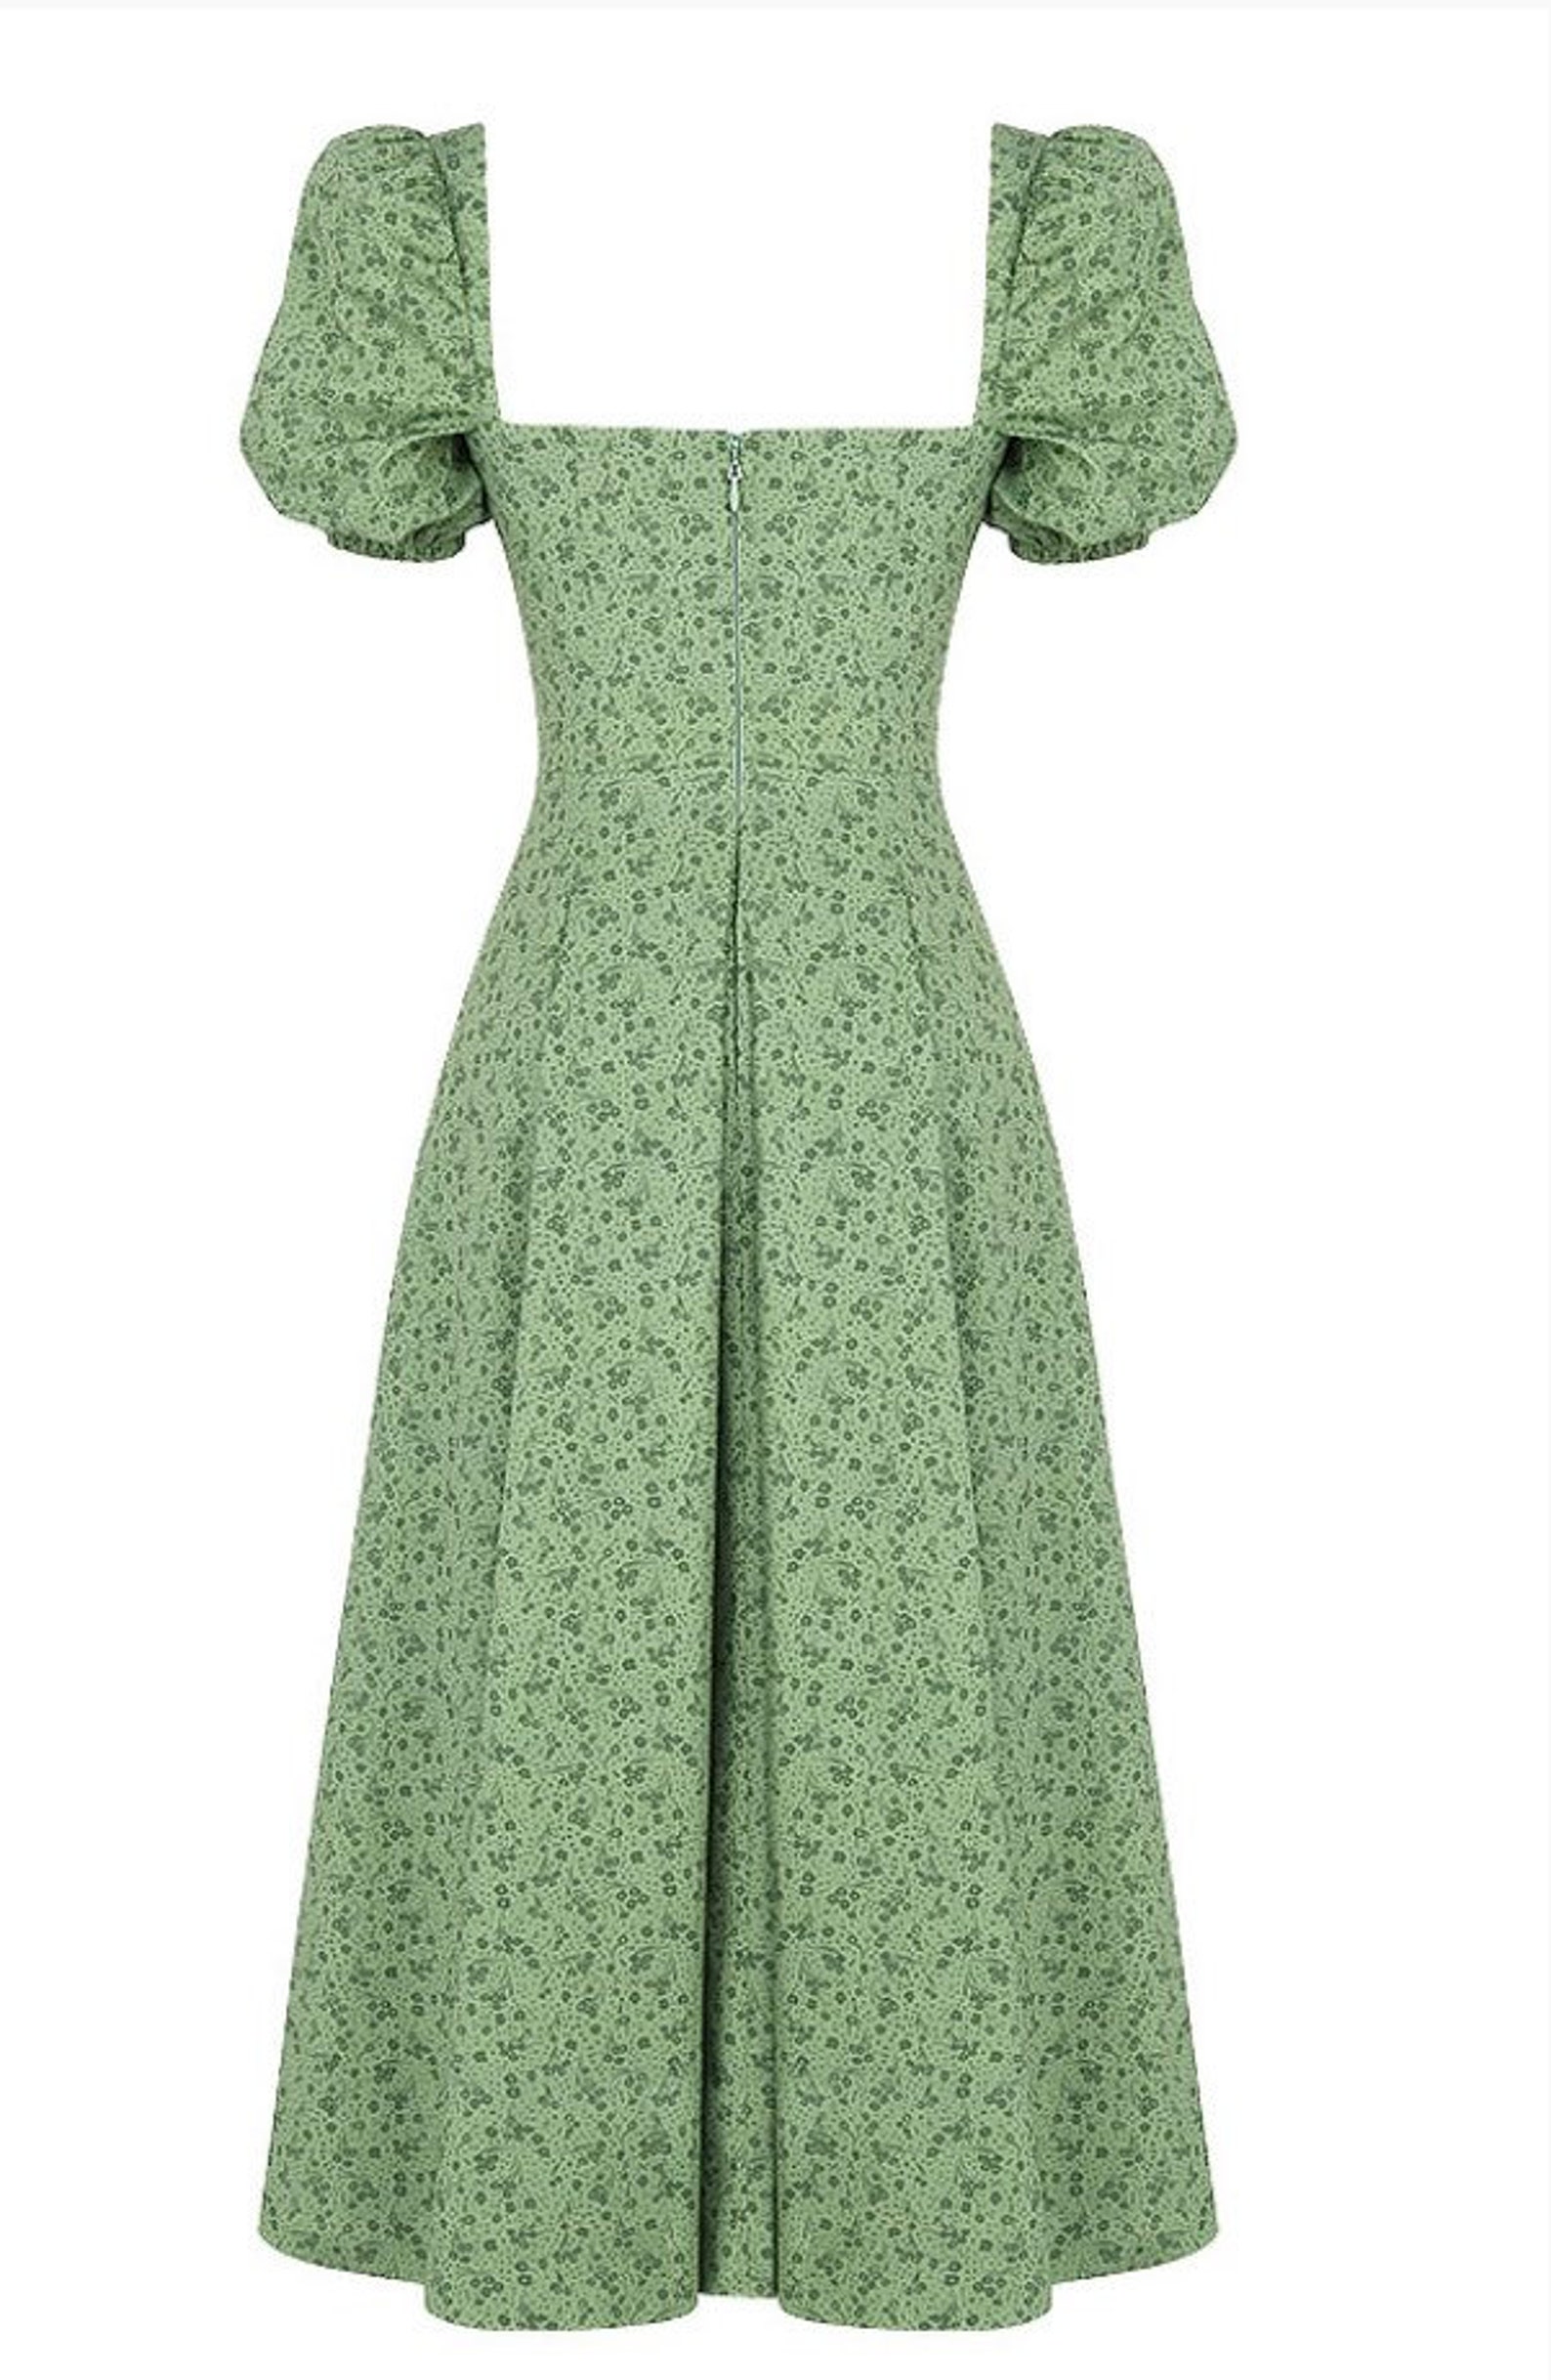 Puff Sleeve Cottagecore Dress Green Floral Midi Maxi Dress for | Etsy